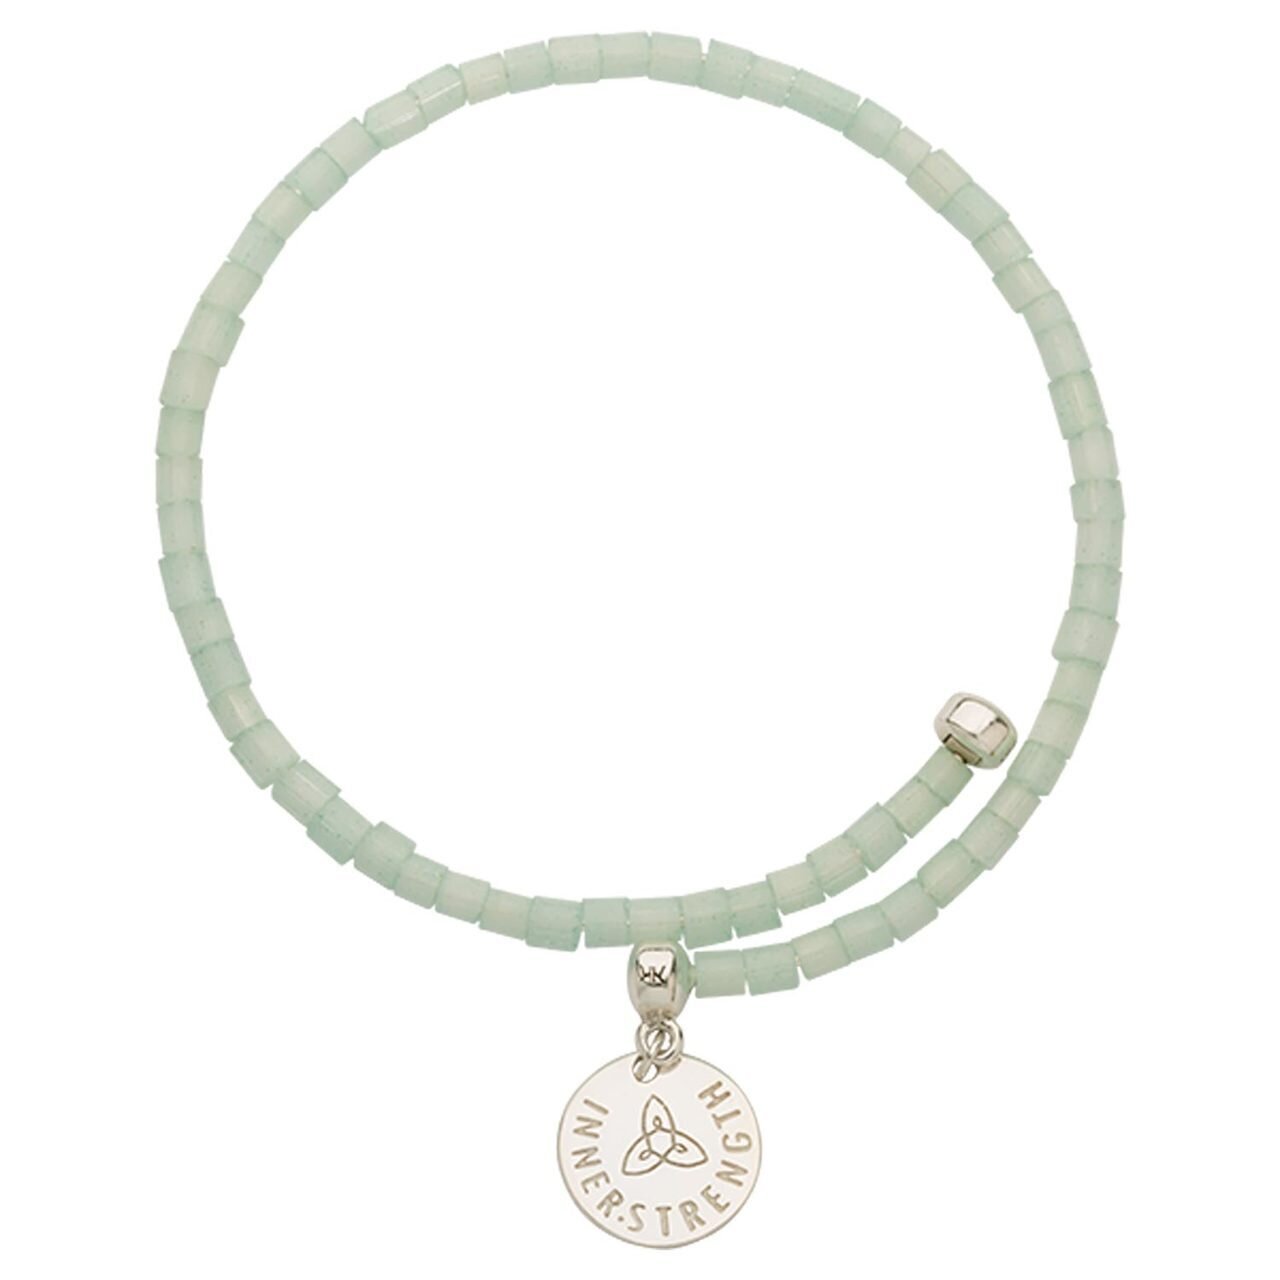 Nikki Lissoni Spiral Bead Bangle Silver-plated with Sea Green Beads In 21cm B1136S21